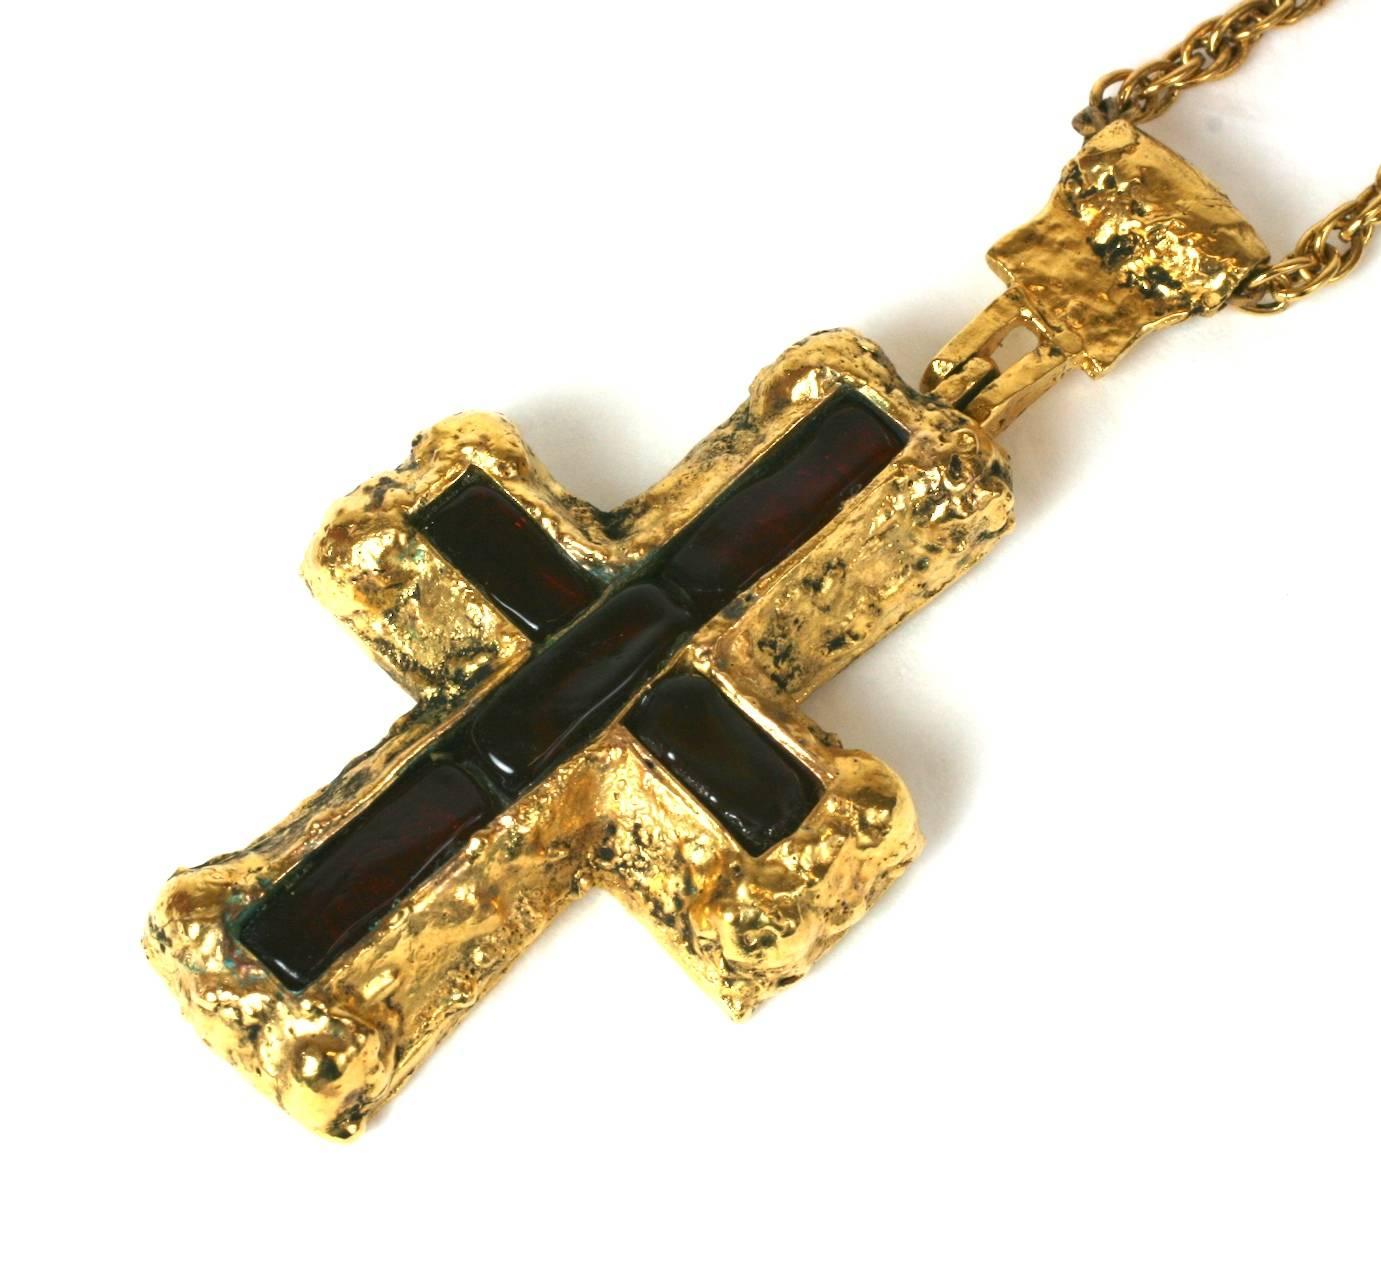 Chanel Byzantine Cruciform  pendant of rough Martelé gilt bronze with five large hand made garnet-ruby pate de verre baguettes. Handmade by Robert Goossens for Chanel. 
According to family tradition this crucifix necklace was a personal gift of